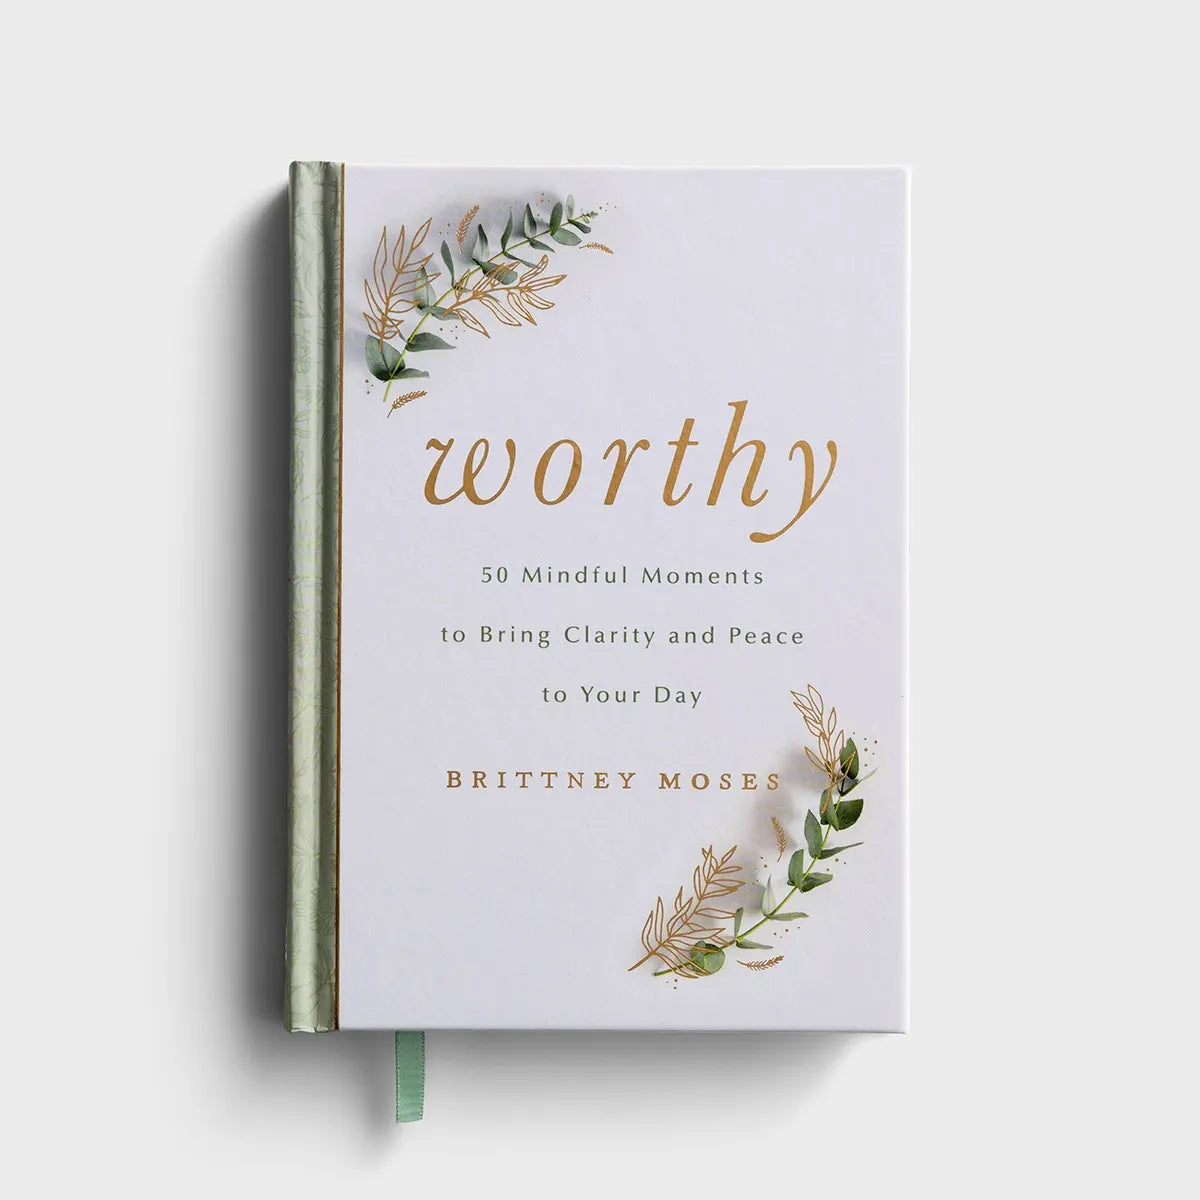 Brittney Moses - Worthy: 50 Mindful Moments to Bring Clarity and Peace to Your Day